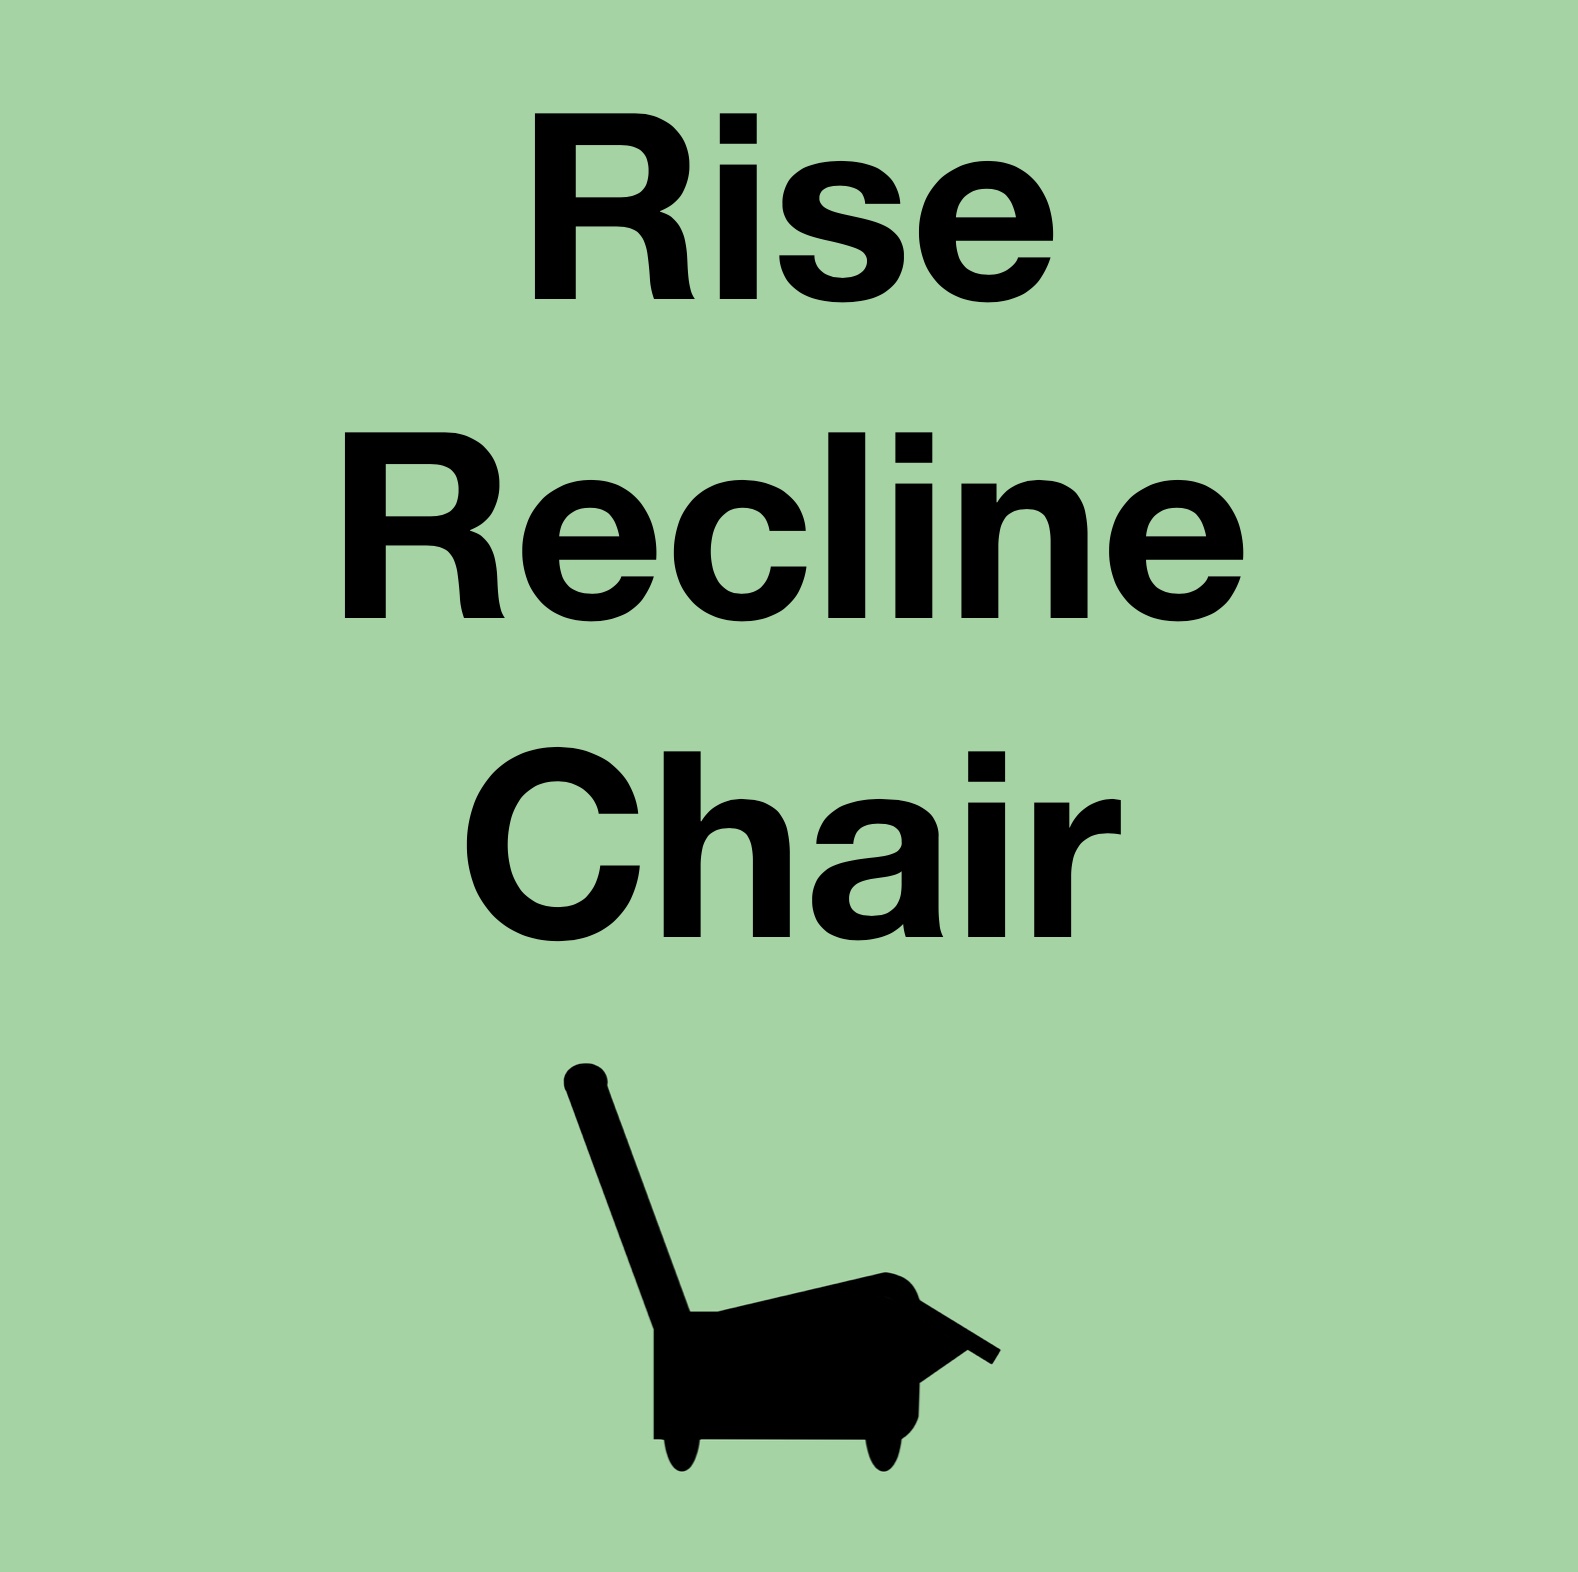 Rise And Recline Chair In Equipment Hire